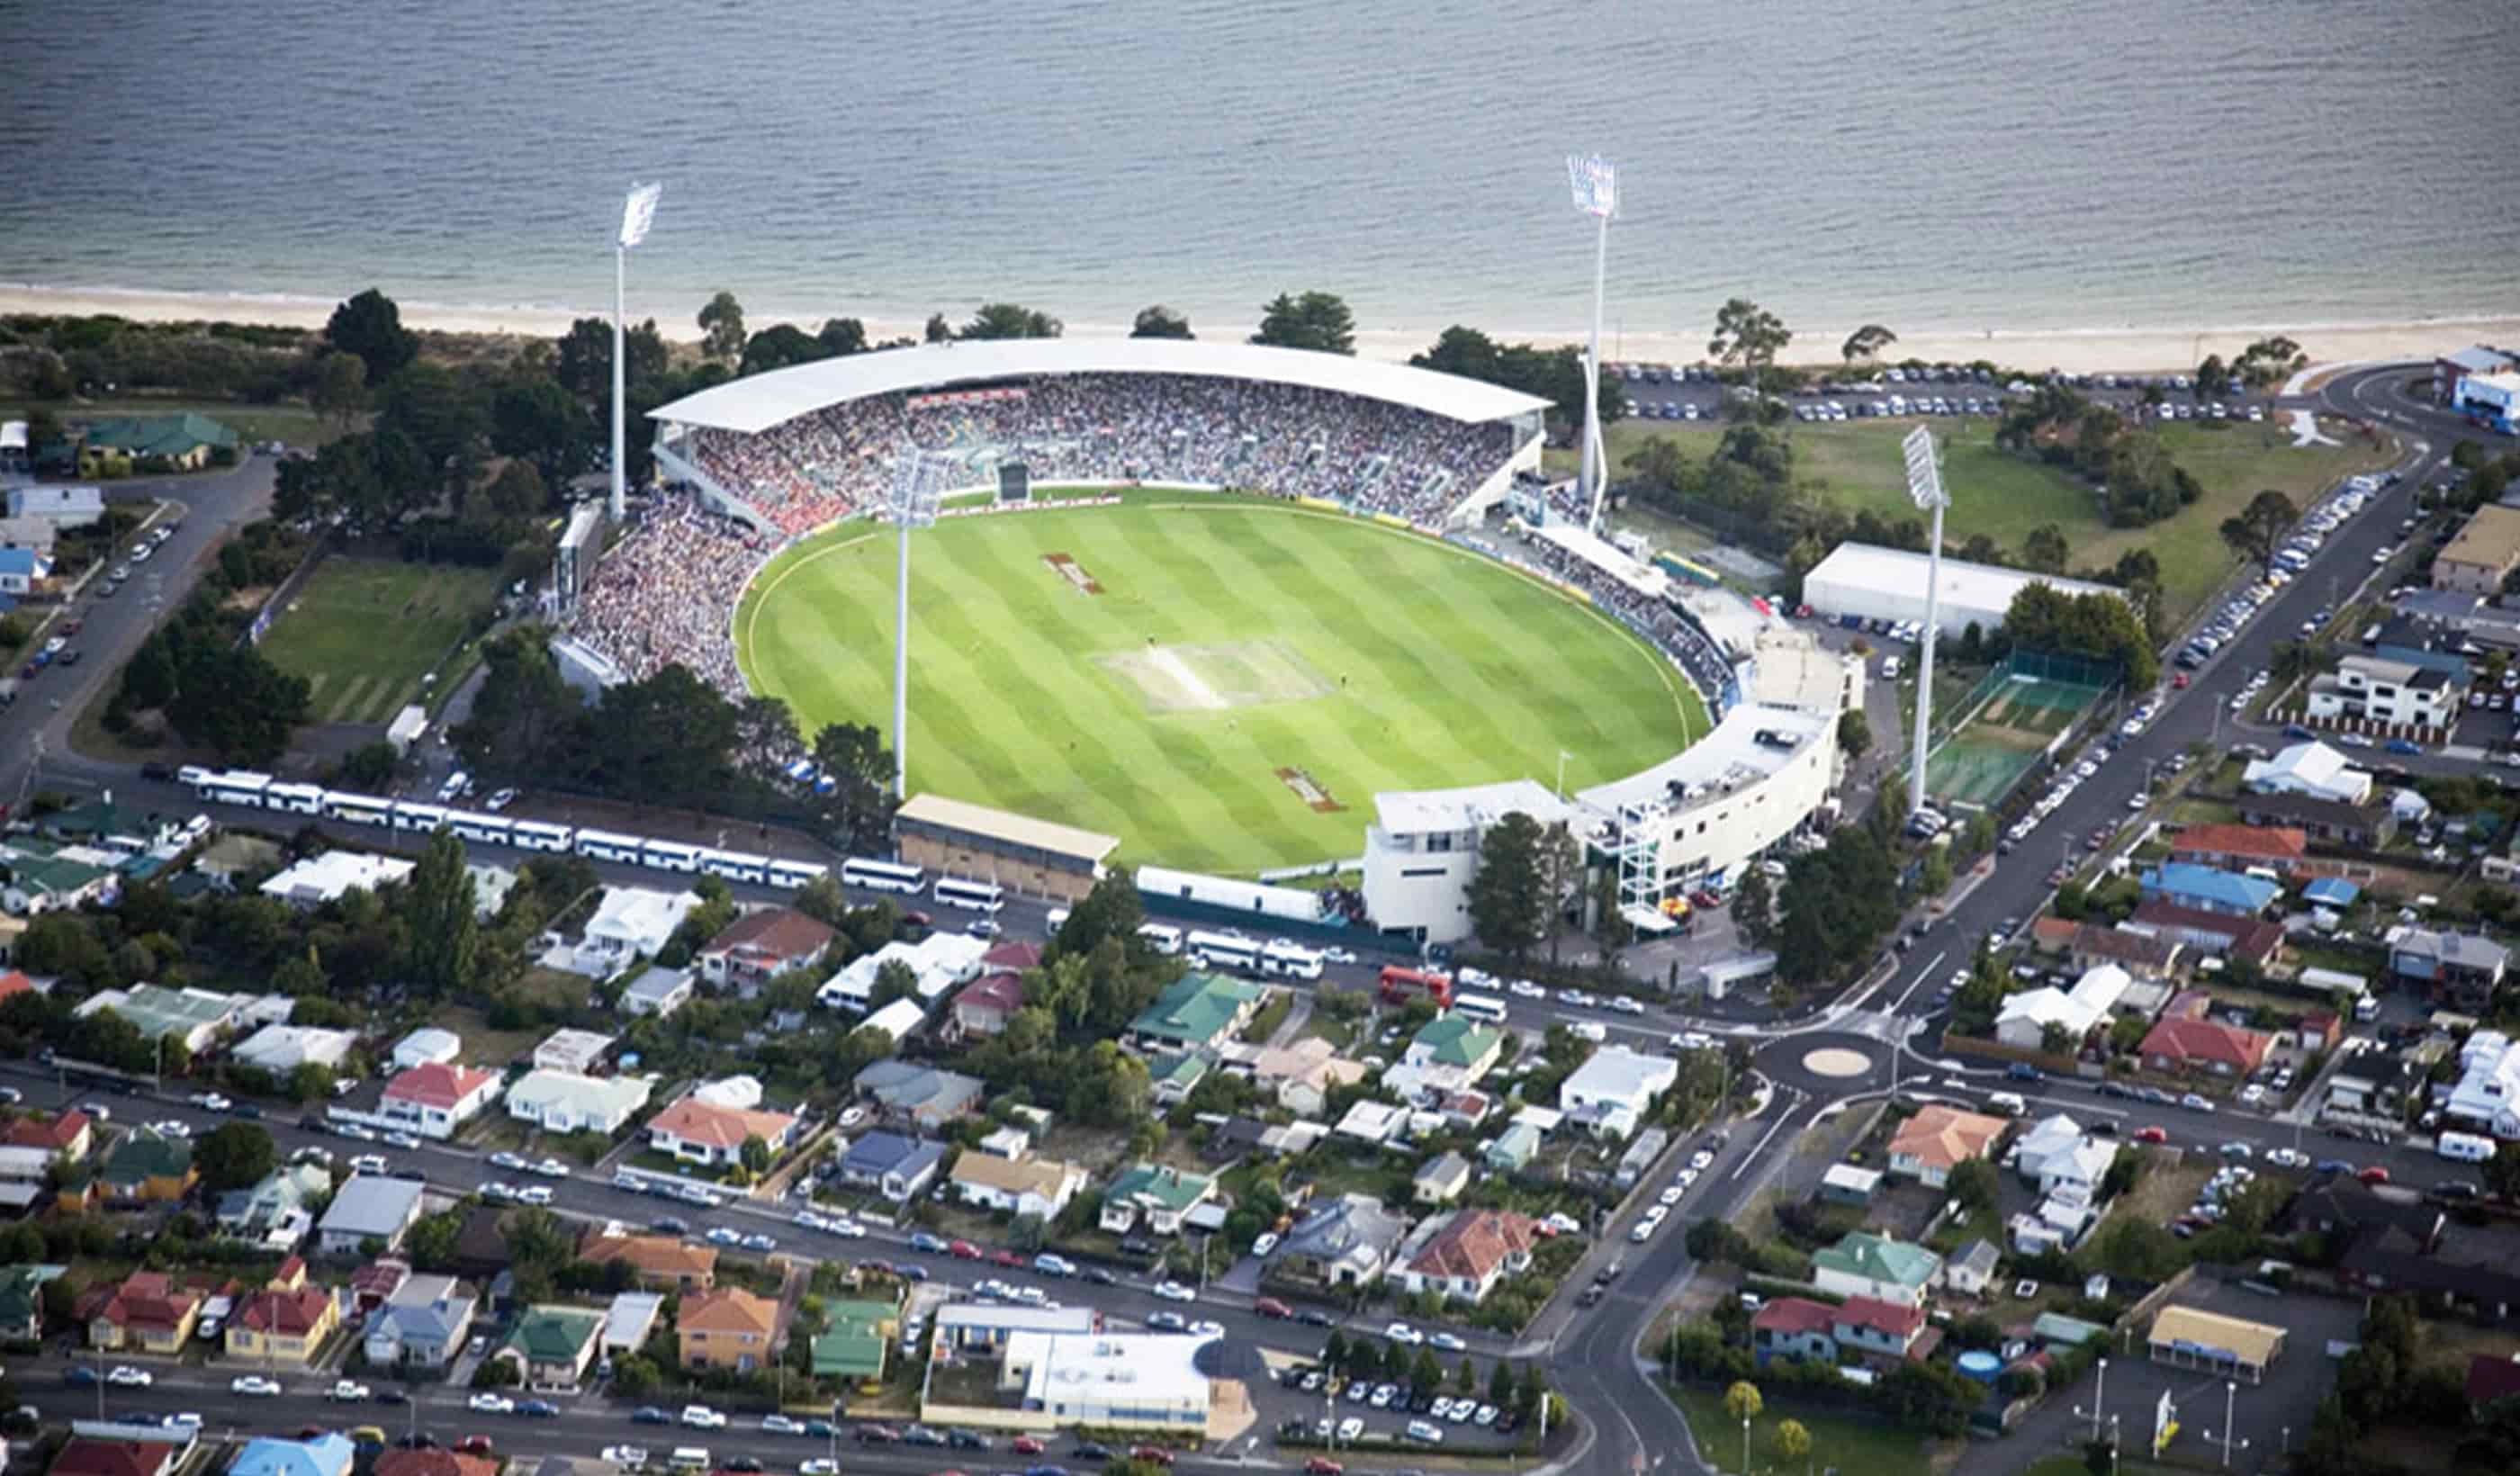 Blundstone Arena - Ricky Ponting Stand